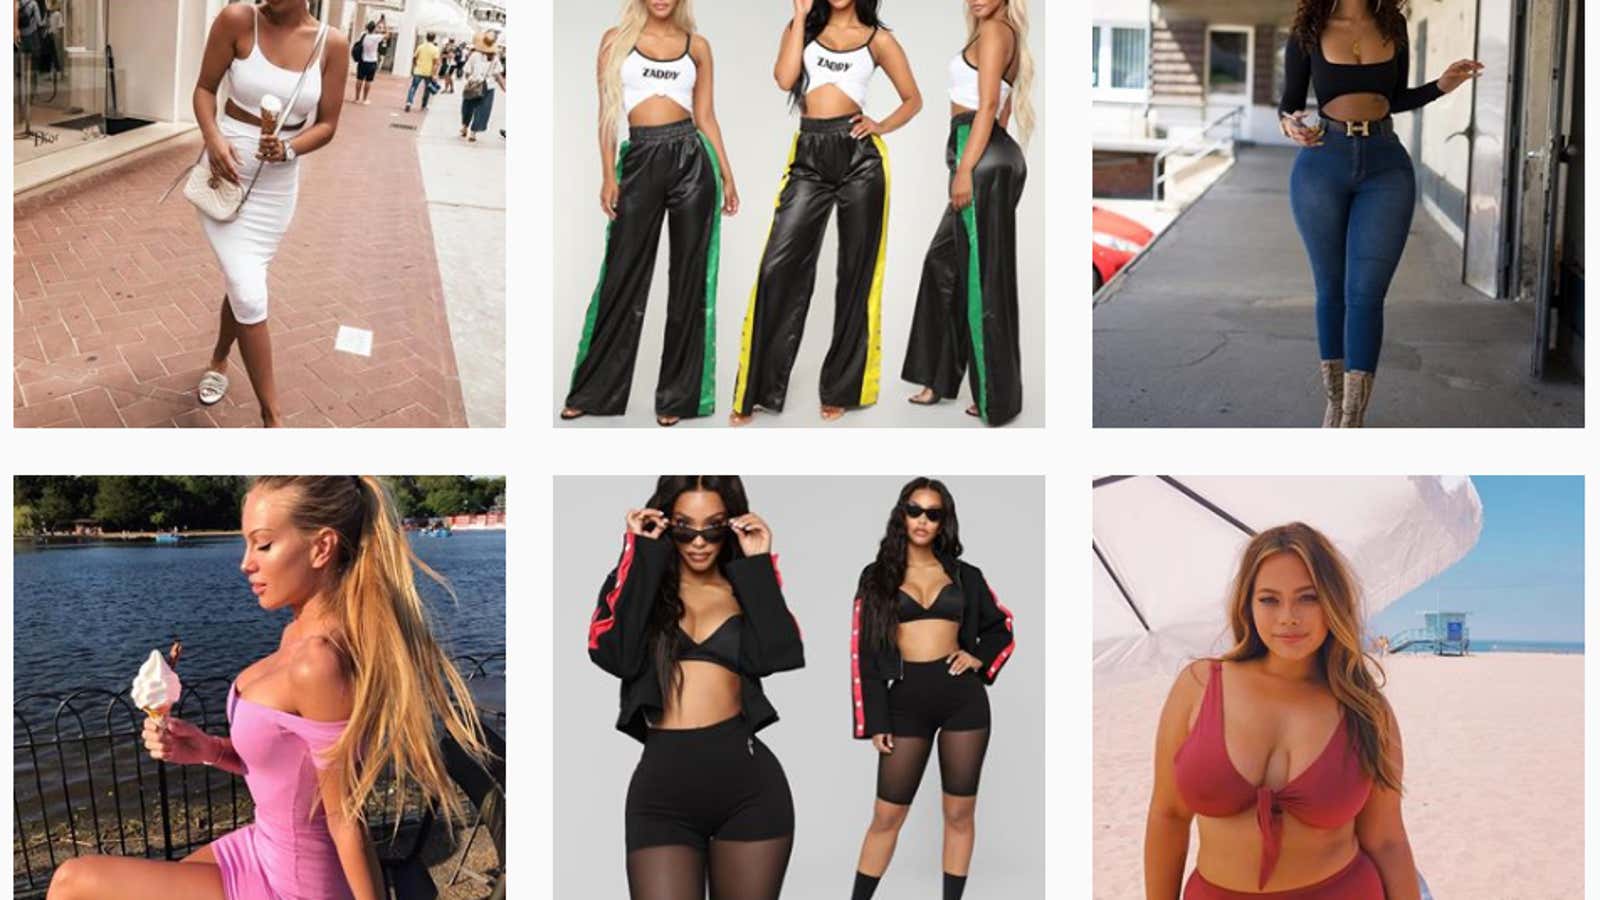 Fashion Nova conquered Instagram by embracing the “thirst trap”